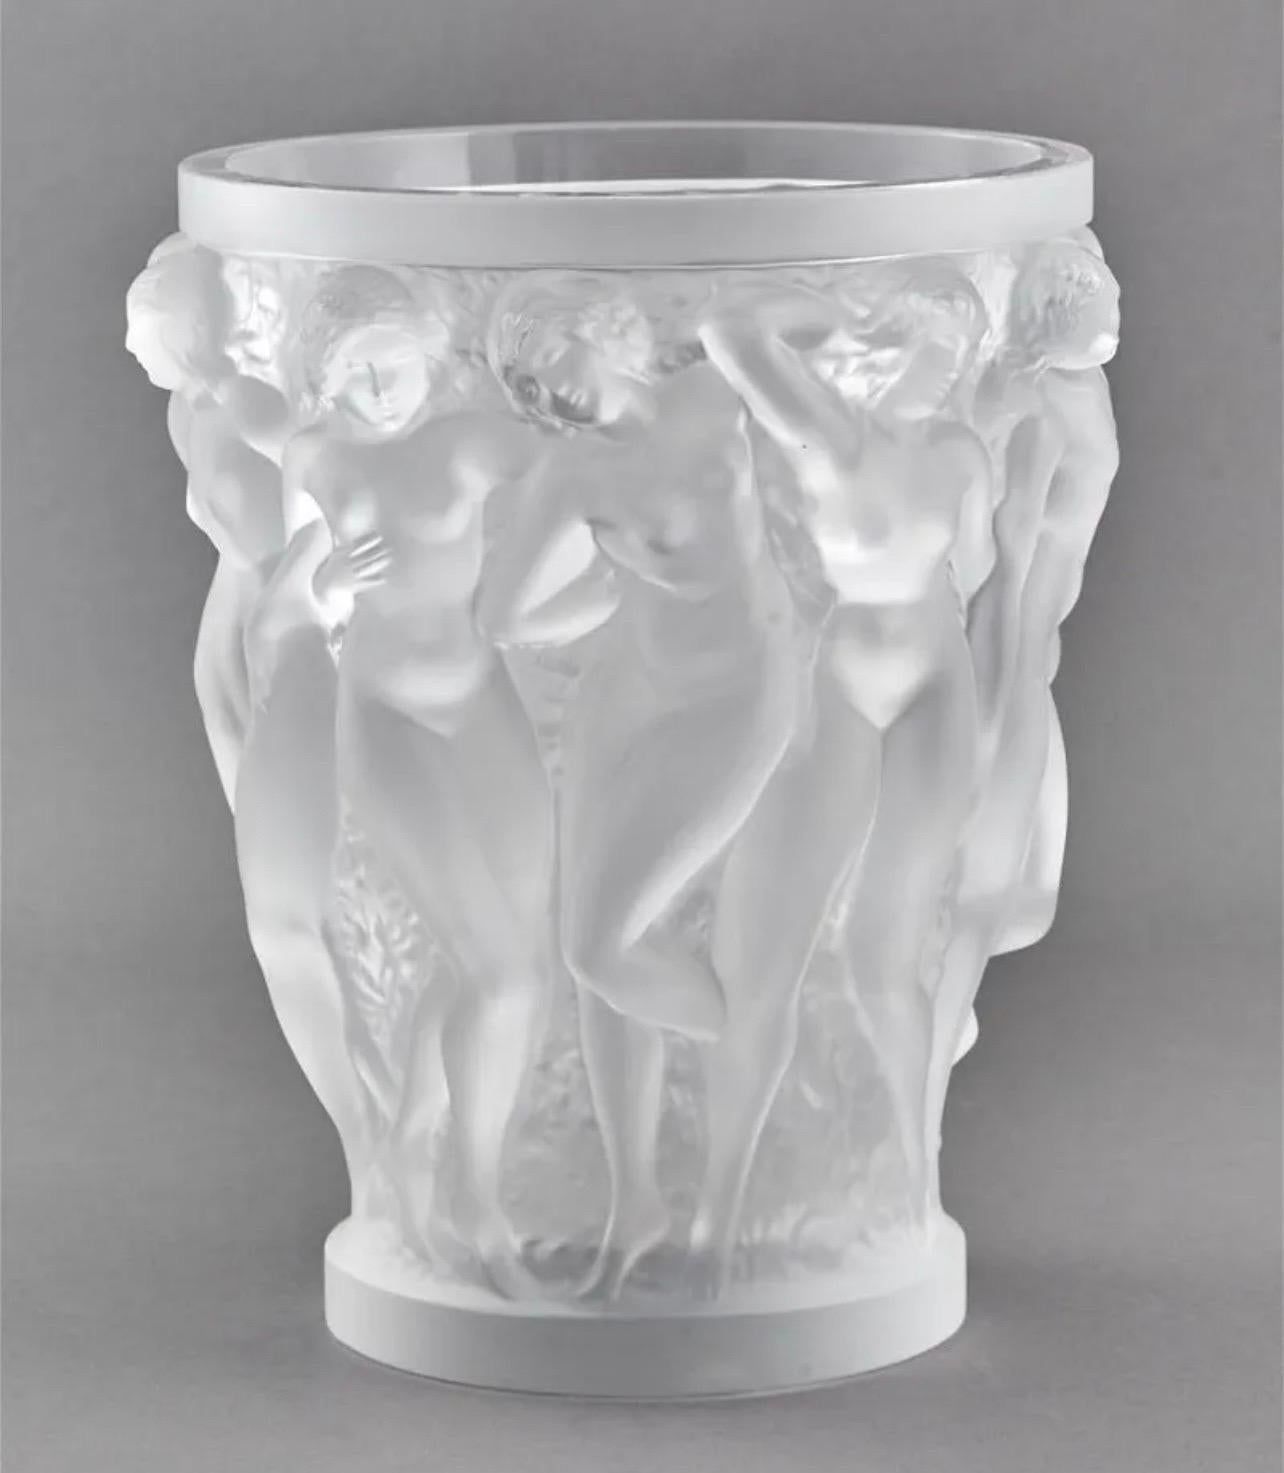 A Wonderful Lalique France Crystal 'Bacchantes' Vase In Very Good Like New Condition.
The Cylindrical Body Moulded With A Continuous Scene Of Dancing Maidens, Completed In A Frosted Finish. 
Inscribed 'Lalique France'. & Retaining Its Original